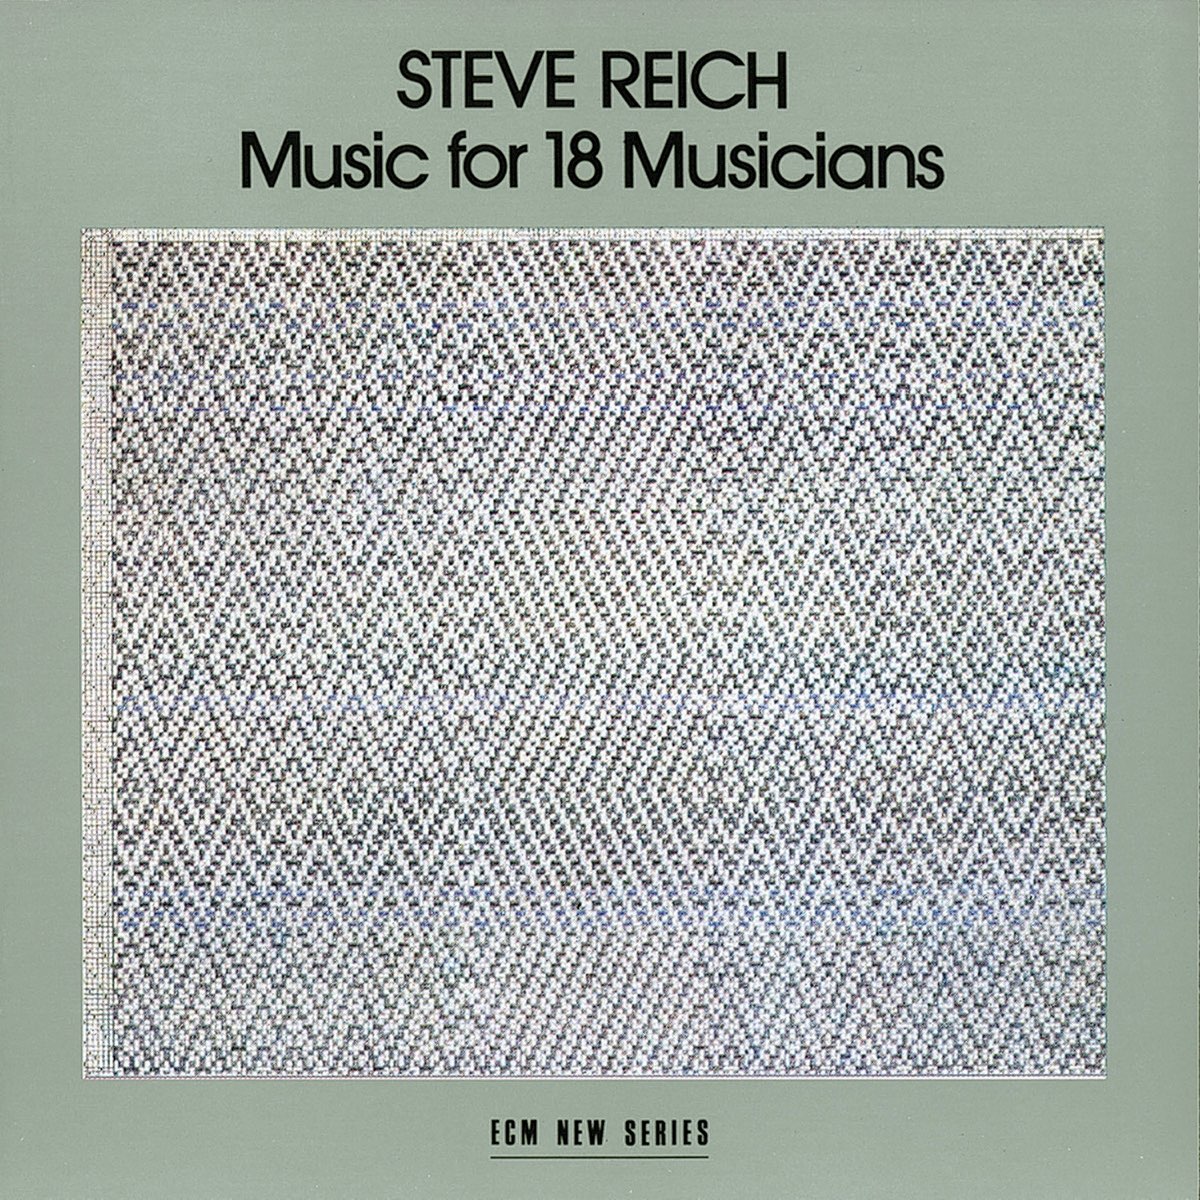 Reich: Music for 18 Musicians by Steve Reich Ensemble on Apple Music